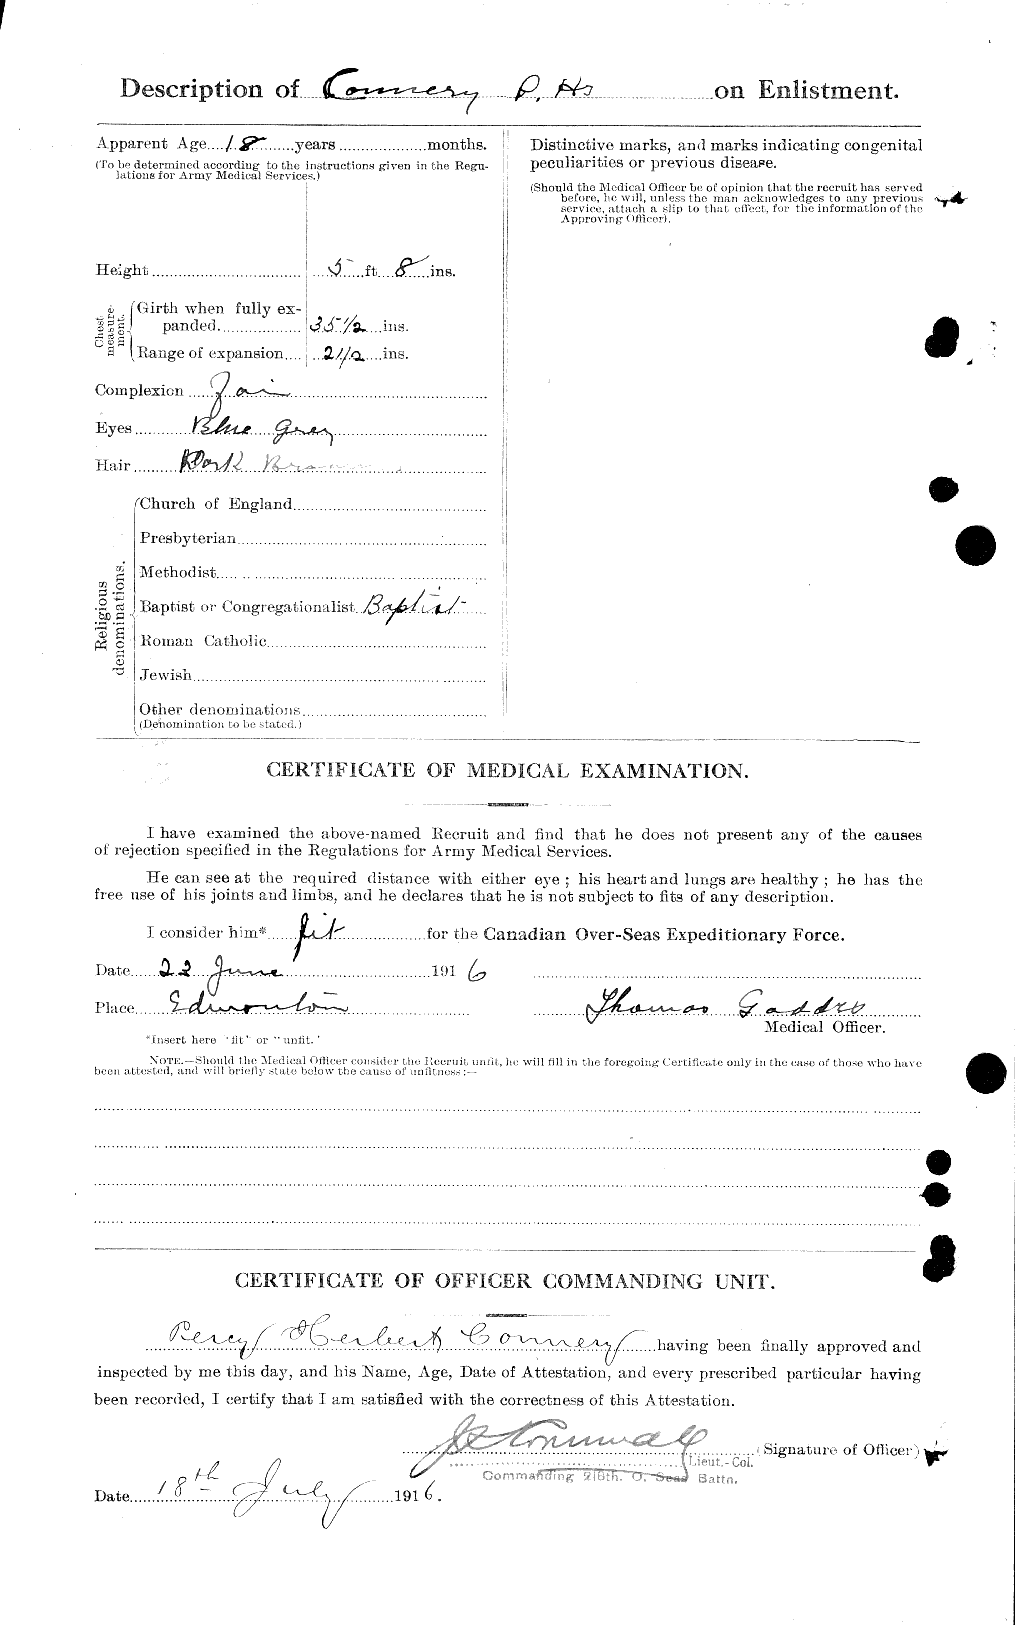 Personnel Records of the First World War - CEF 031289b